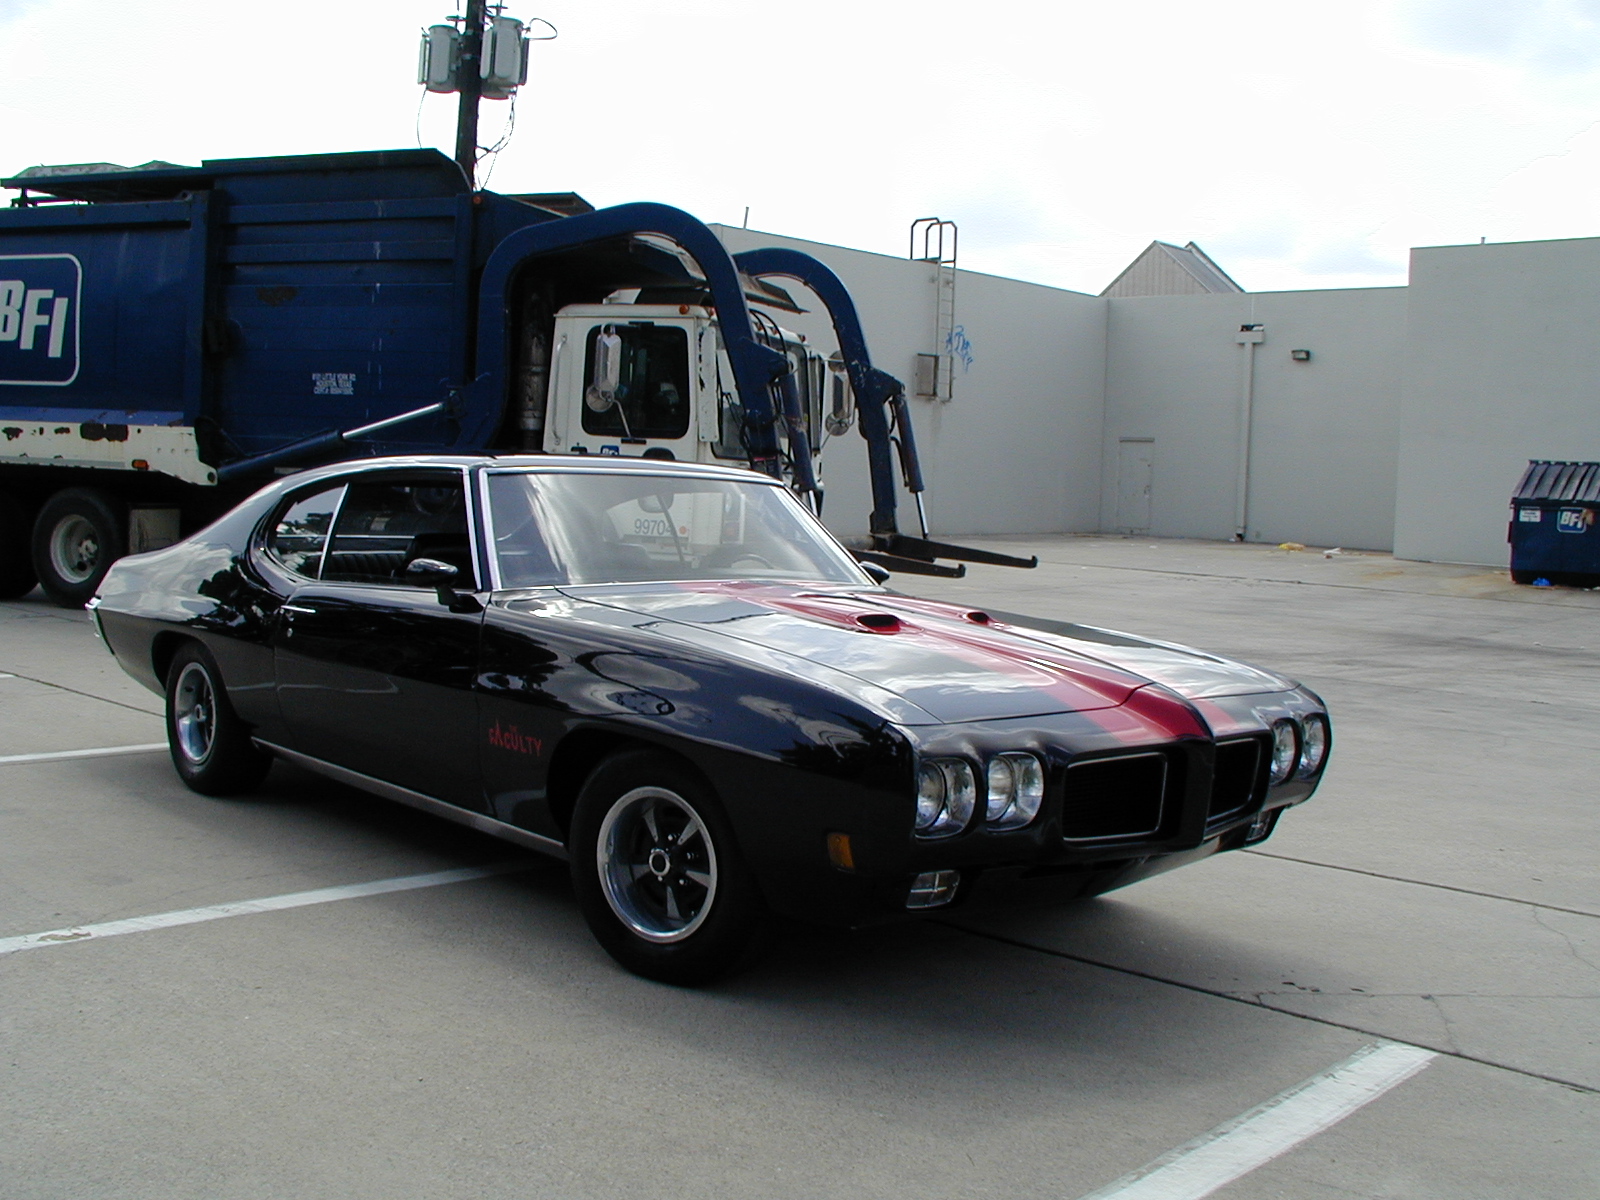 1970 Pontiac GTO 455 from the movie The Faculty..